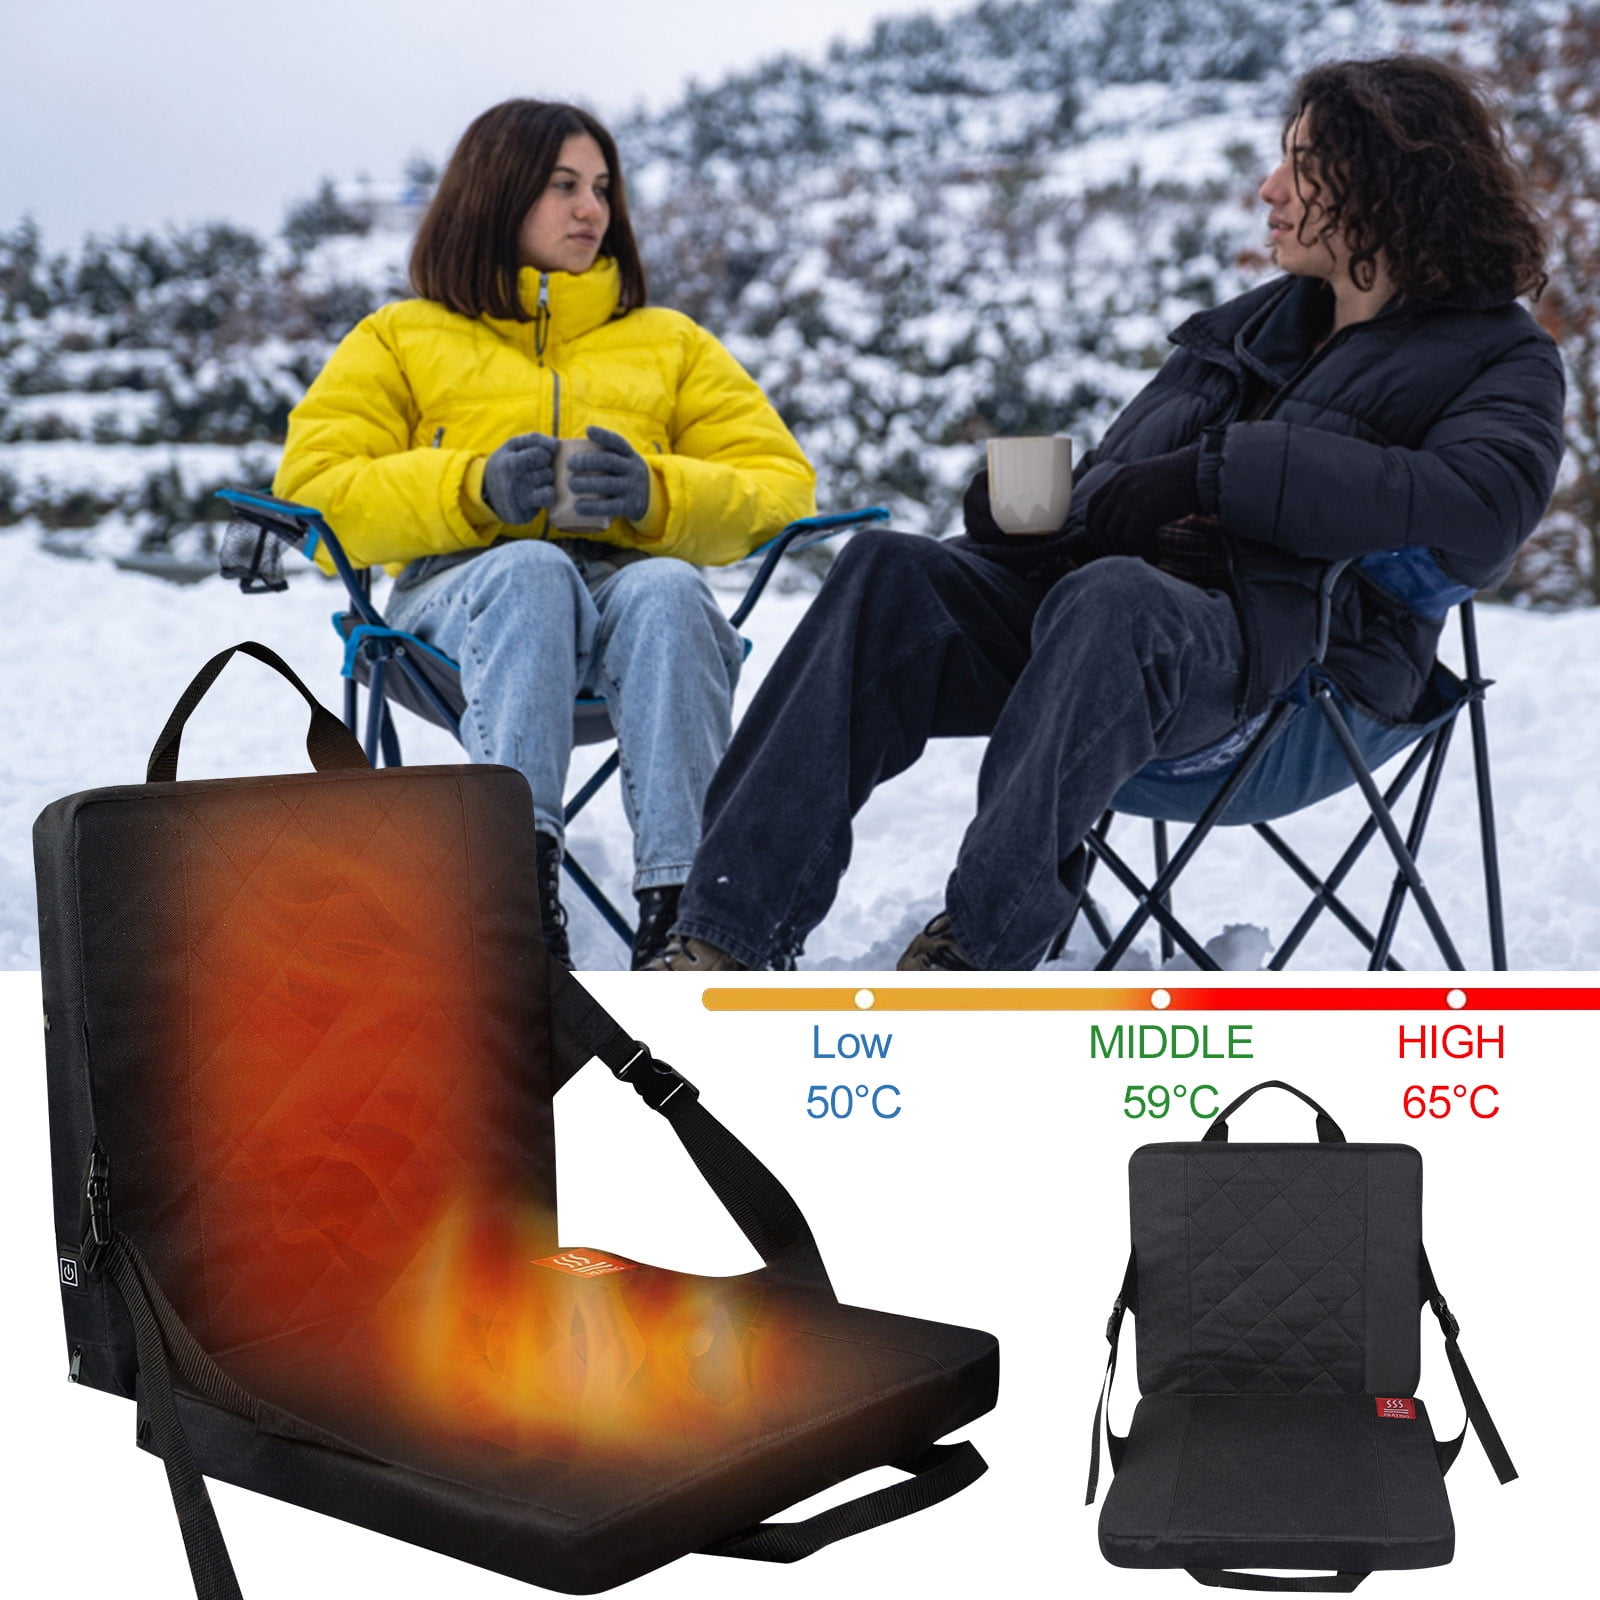 DCQRY Portable Heated Seat Cushion Pad Electric Stadium Seat Cushion Heated  USB Power with 3 Levels Fast Heating Hunting Seat Pad for Office Park Boat